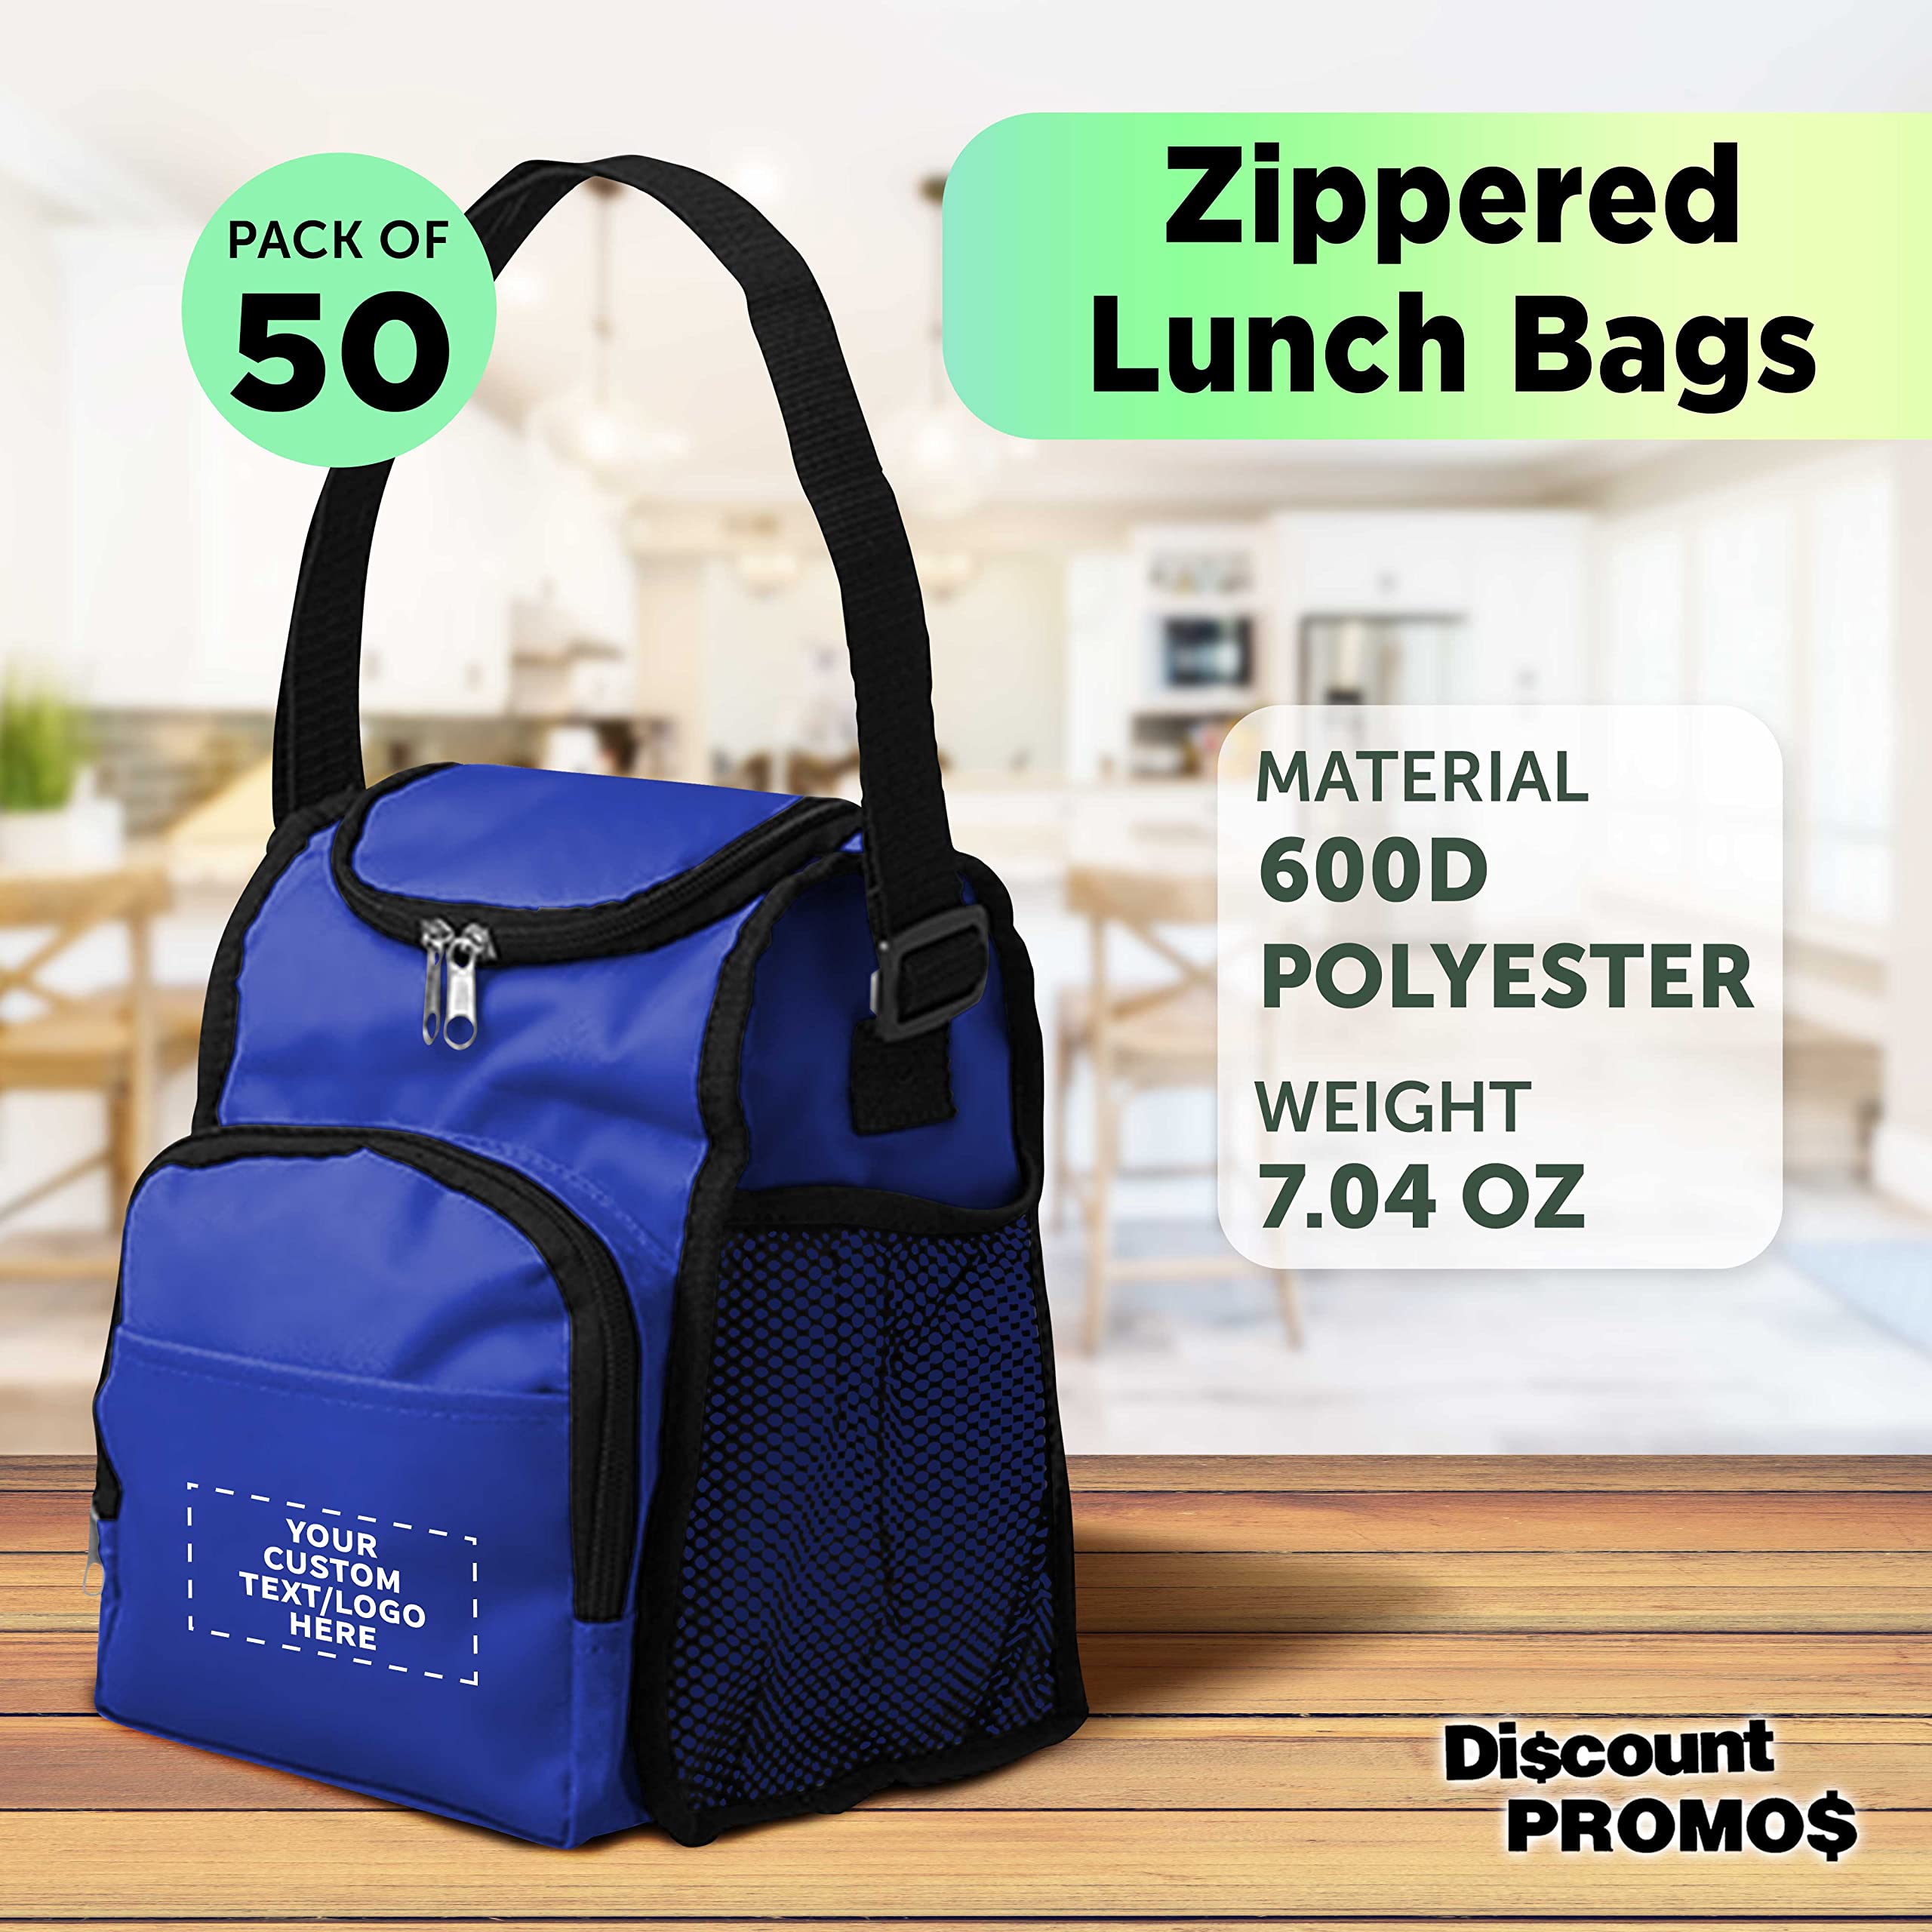 DISCOUNT PROMOS Custom Multipurpose Zippered Lunch Bags Set of 50, Personalized Bulk Pack - Meal Holder, Perfect for Work, Camping and Other Outdoor Events - Blue